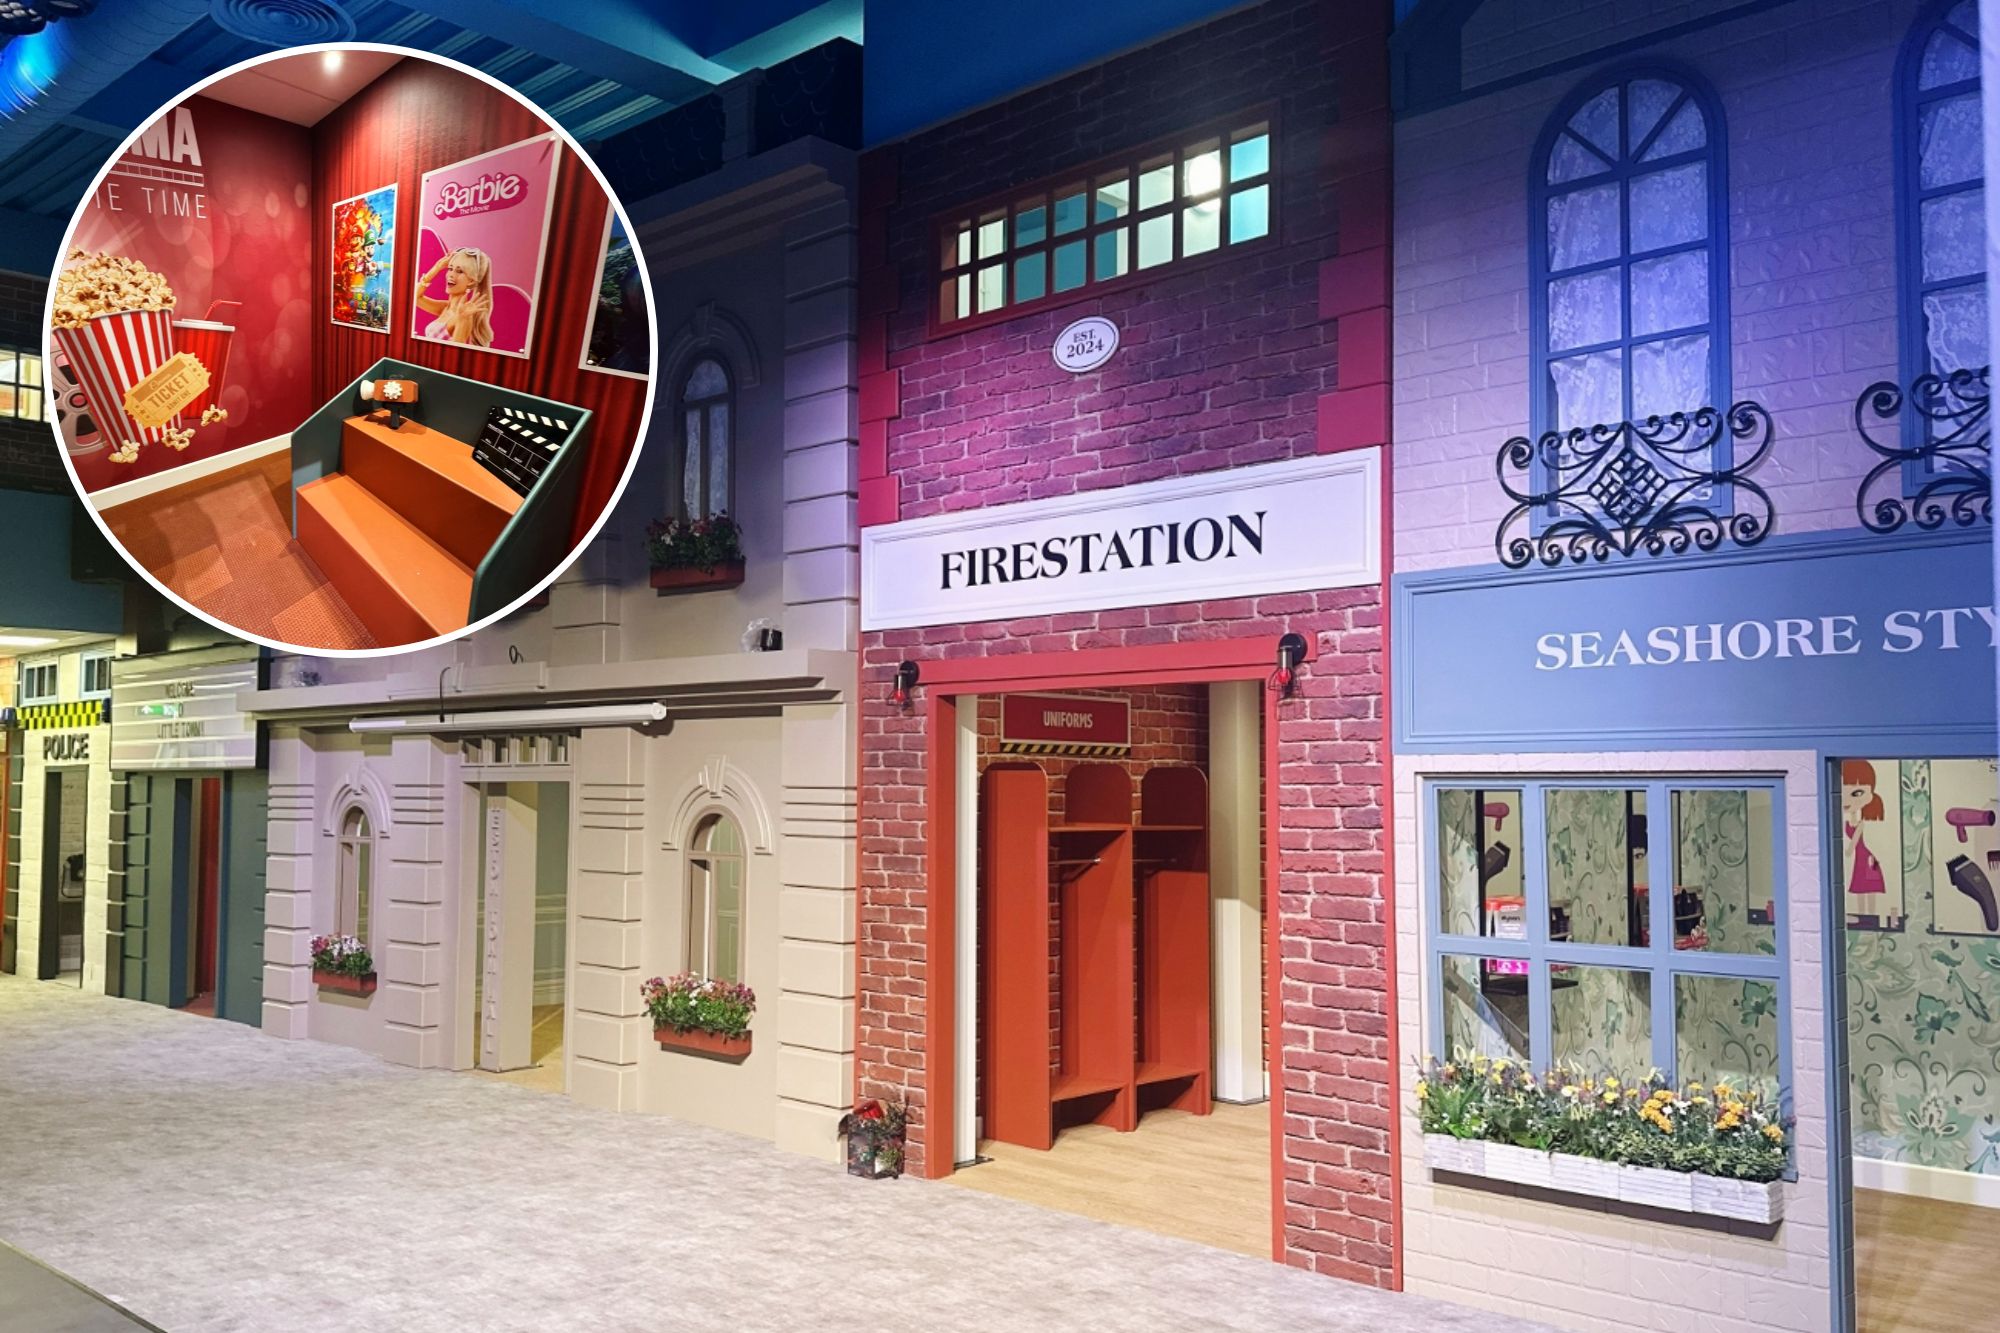 UK seaside town to open brand-new interactive kids' play attraction this week